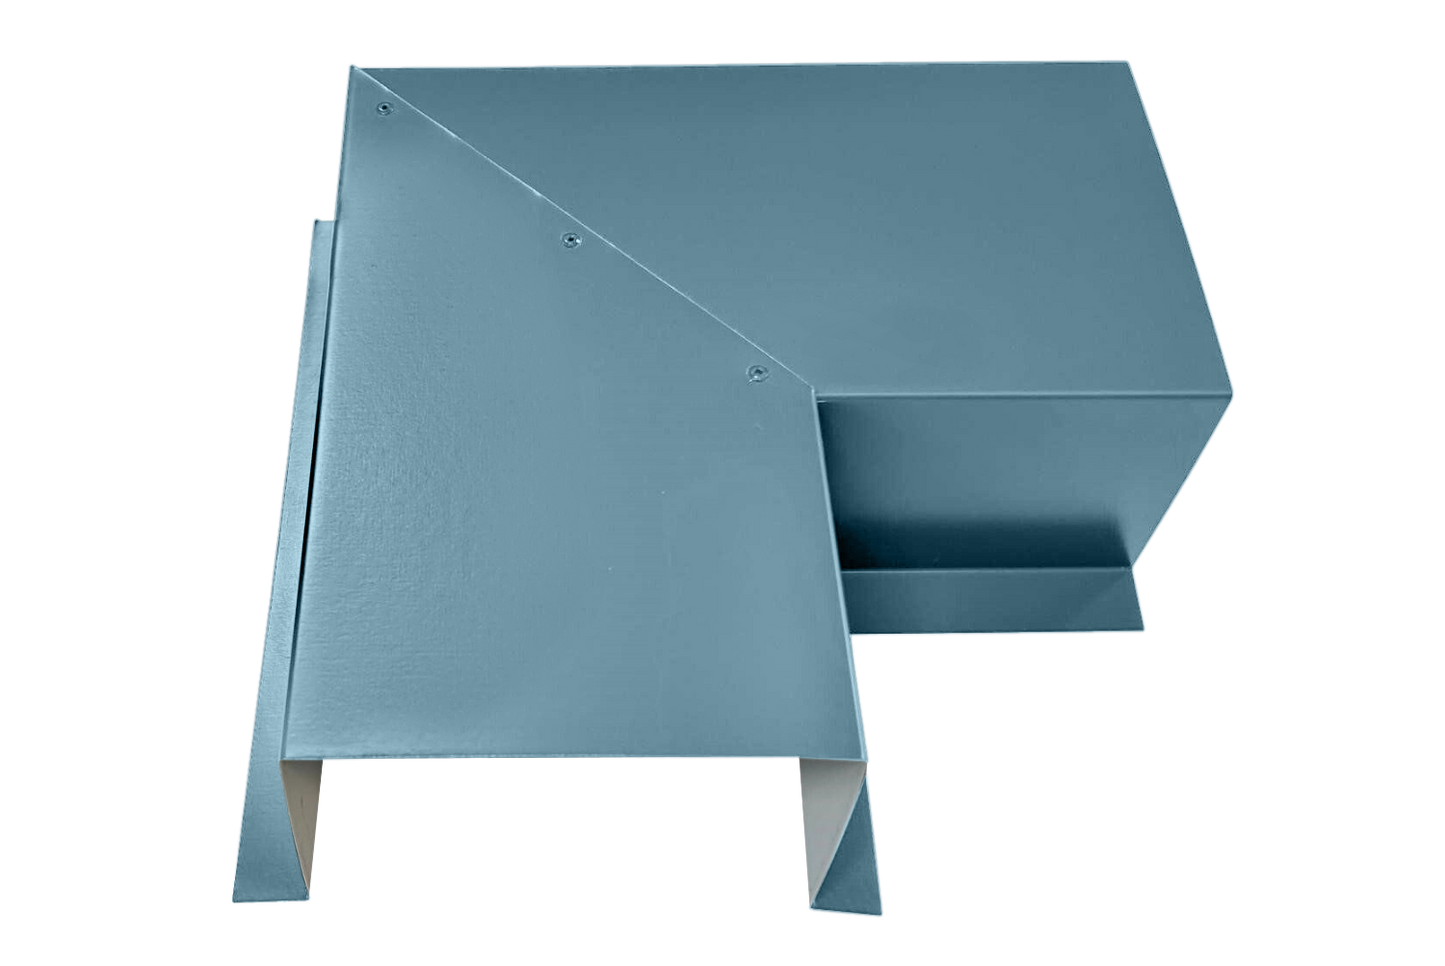 A blue, metallic vent duct made of premium quality 24 gauge steel with a rectangular base, angled joint, and extension. The structure has clean edges and a matte finish, ensuring easy installation. Replace "vent duct" with the product name: "Perma Cover Commercial Series - 24 Gauge Line Set Cover Side Turning Elbows - Premium Quality.